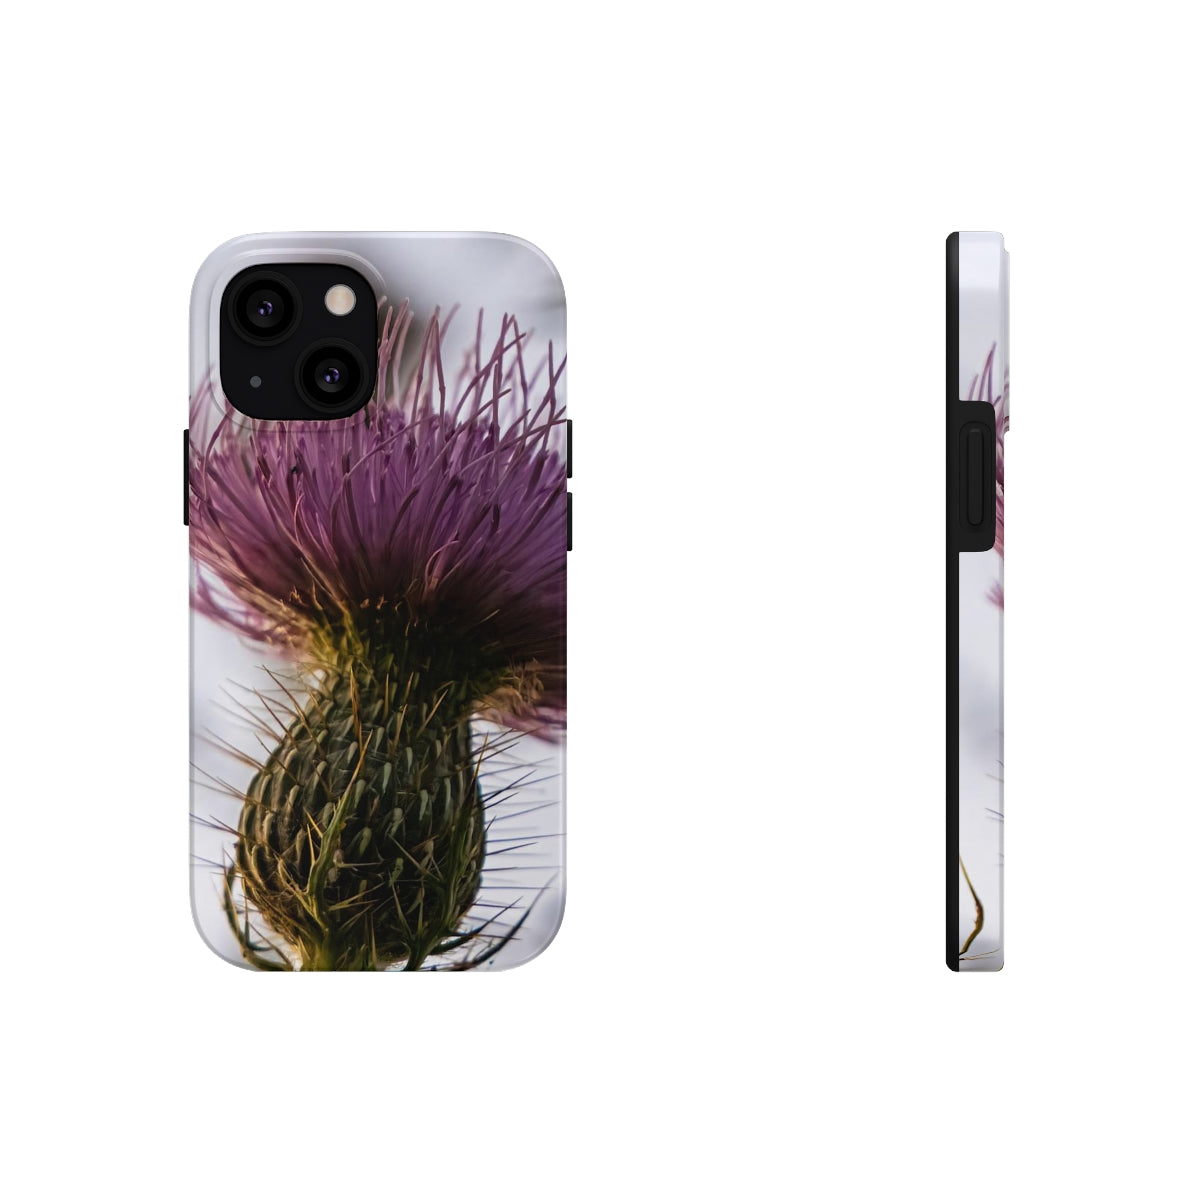 Thissell Be Noticed Tough Phone Case, Case-Mate